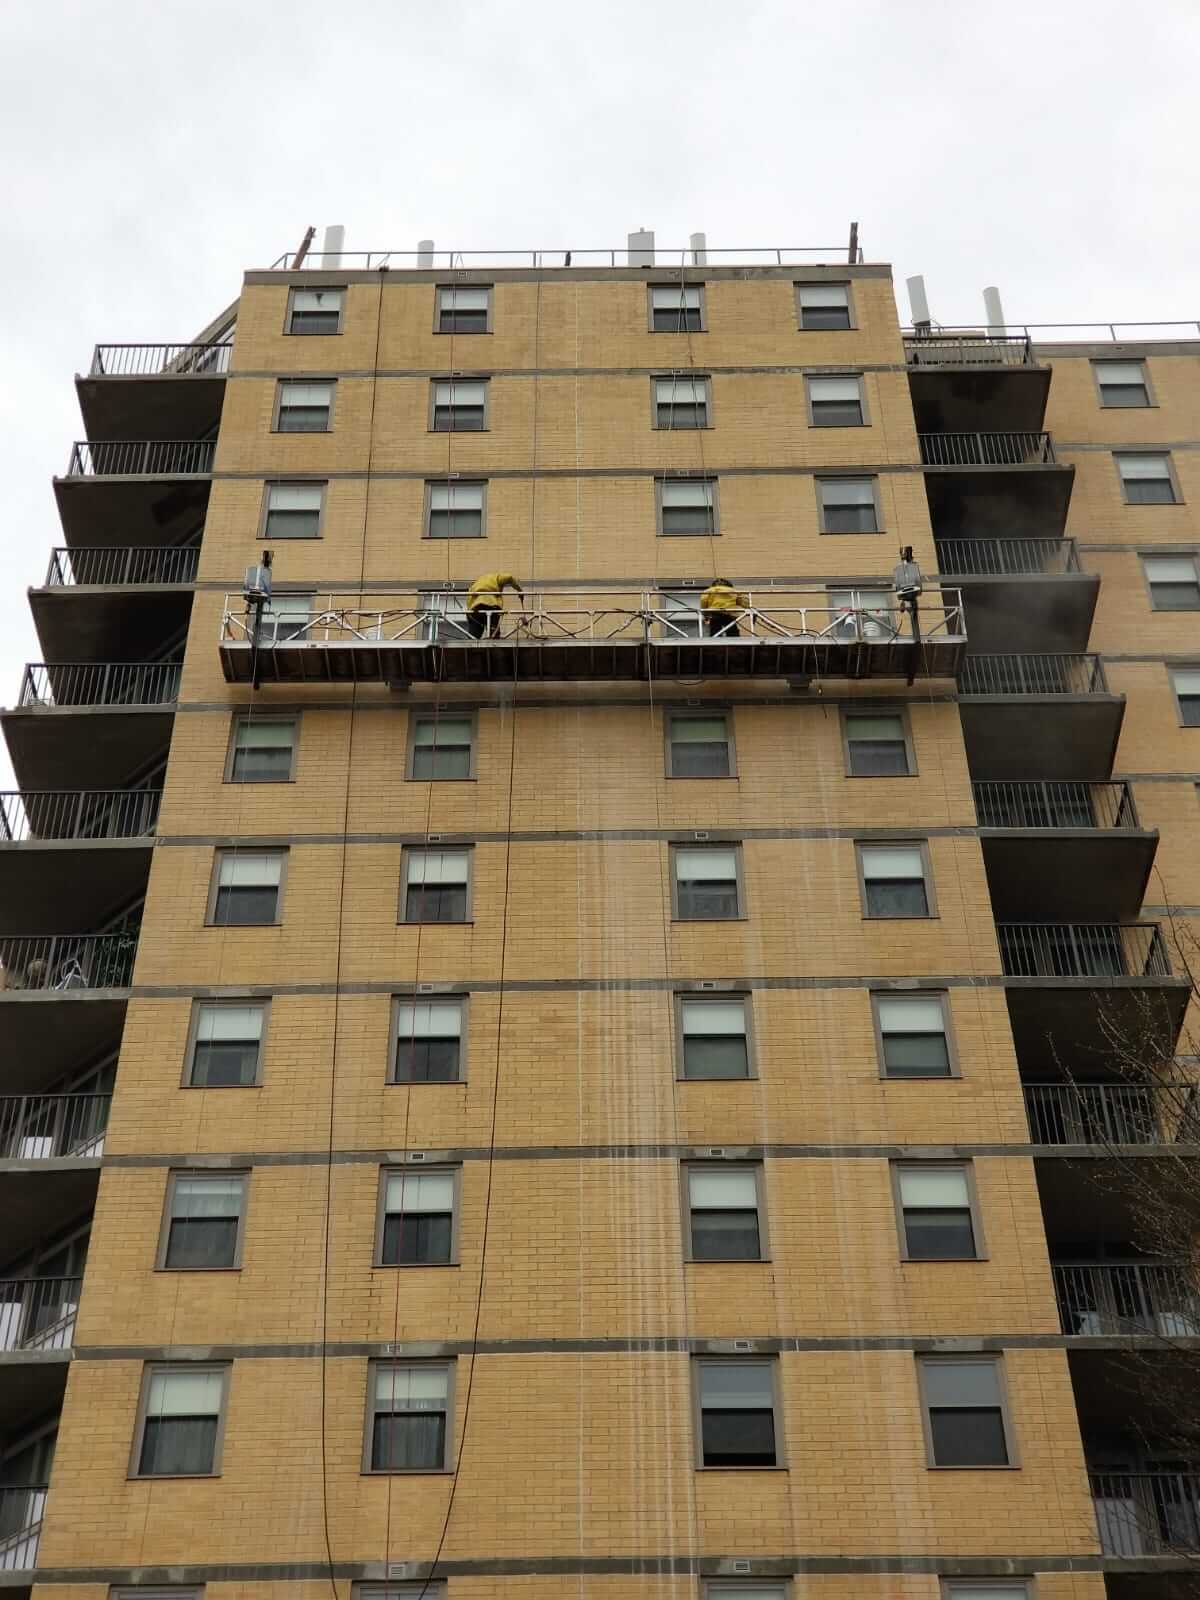 Presto waterproofing technicians using swing stage on B’nai B’rith Apartments, Allentown, PA